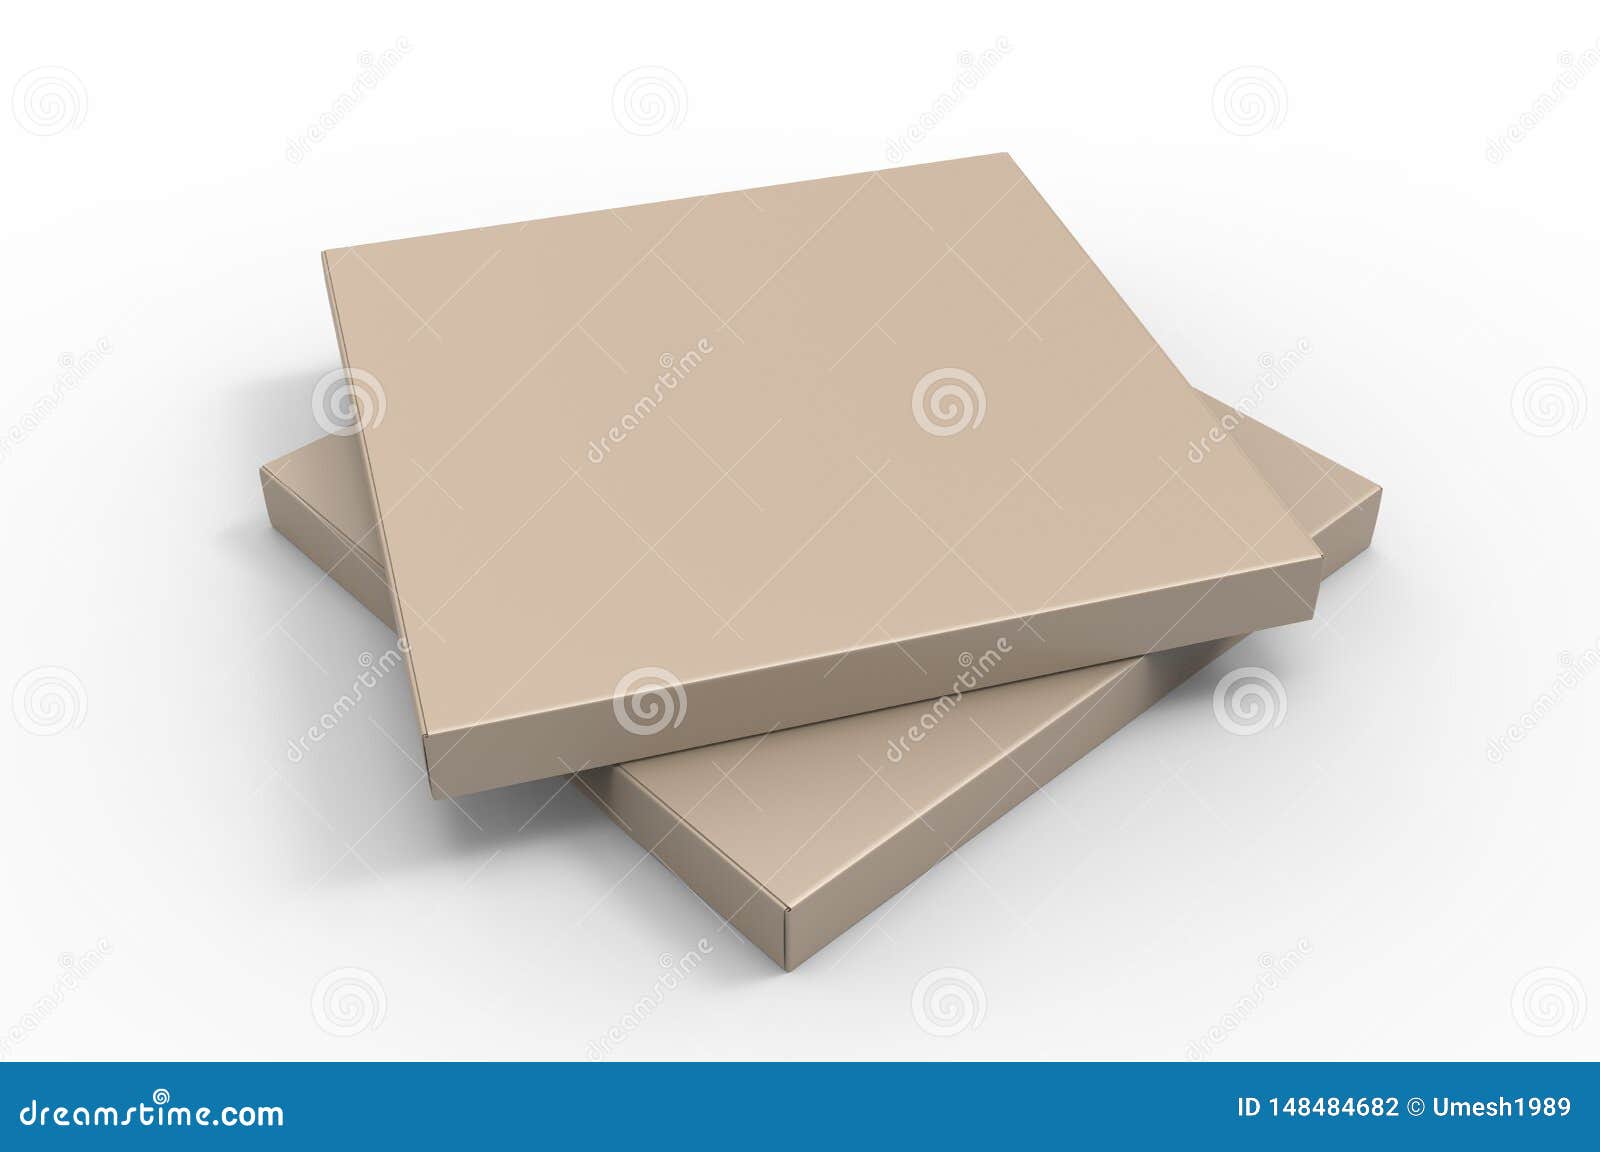 Download Blank Shipping Mailer Hard Cardboard Box For Branding And ...